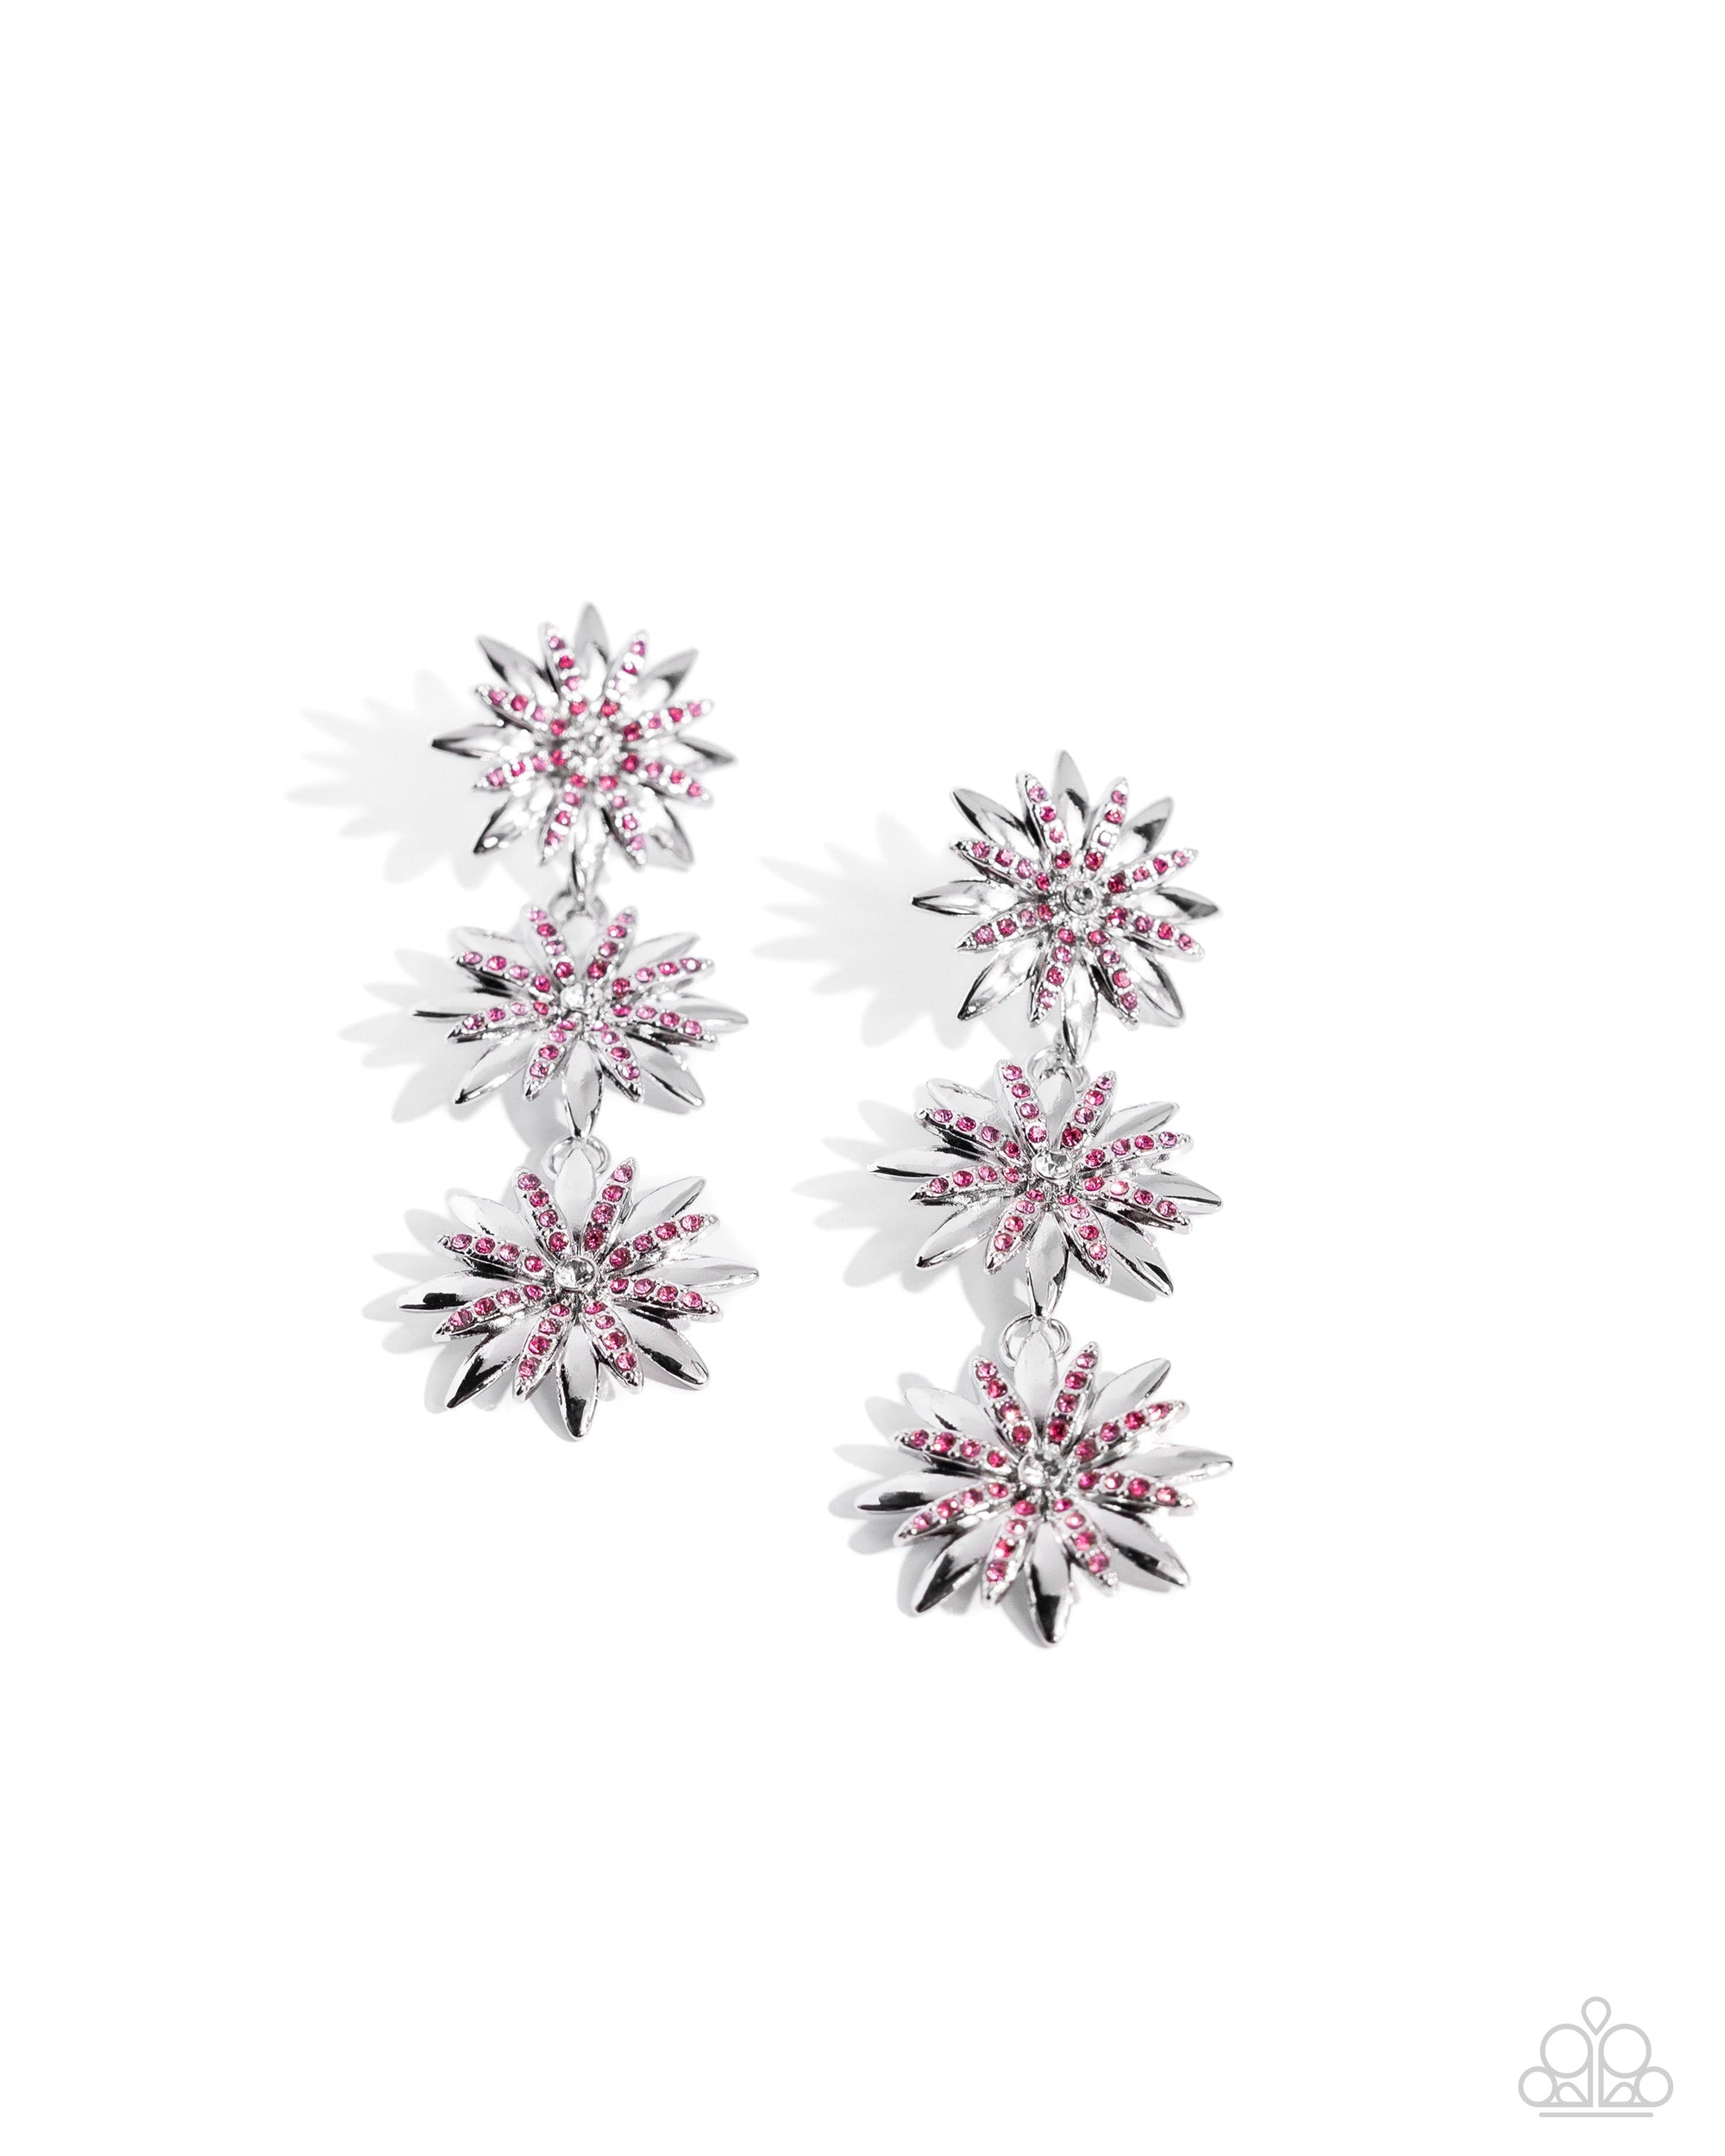 Petaled Princess Pink Rhinestone Floral Earrings - Paparazzi Accessories- lightbox - CarasShop.com - $5 Jewelry by Cara Jewels